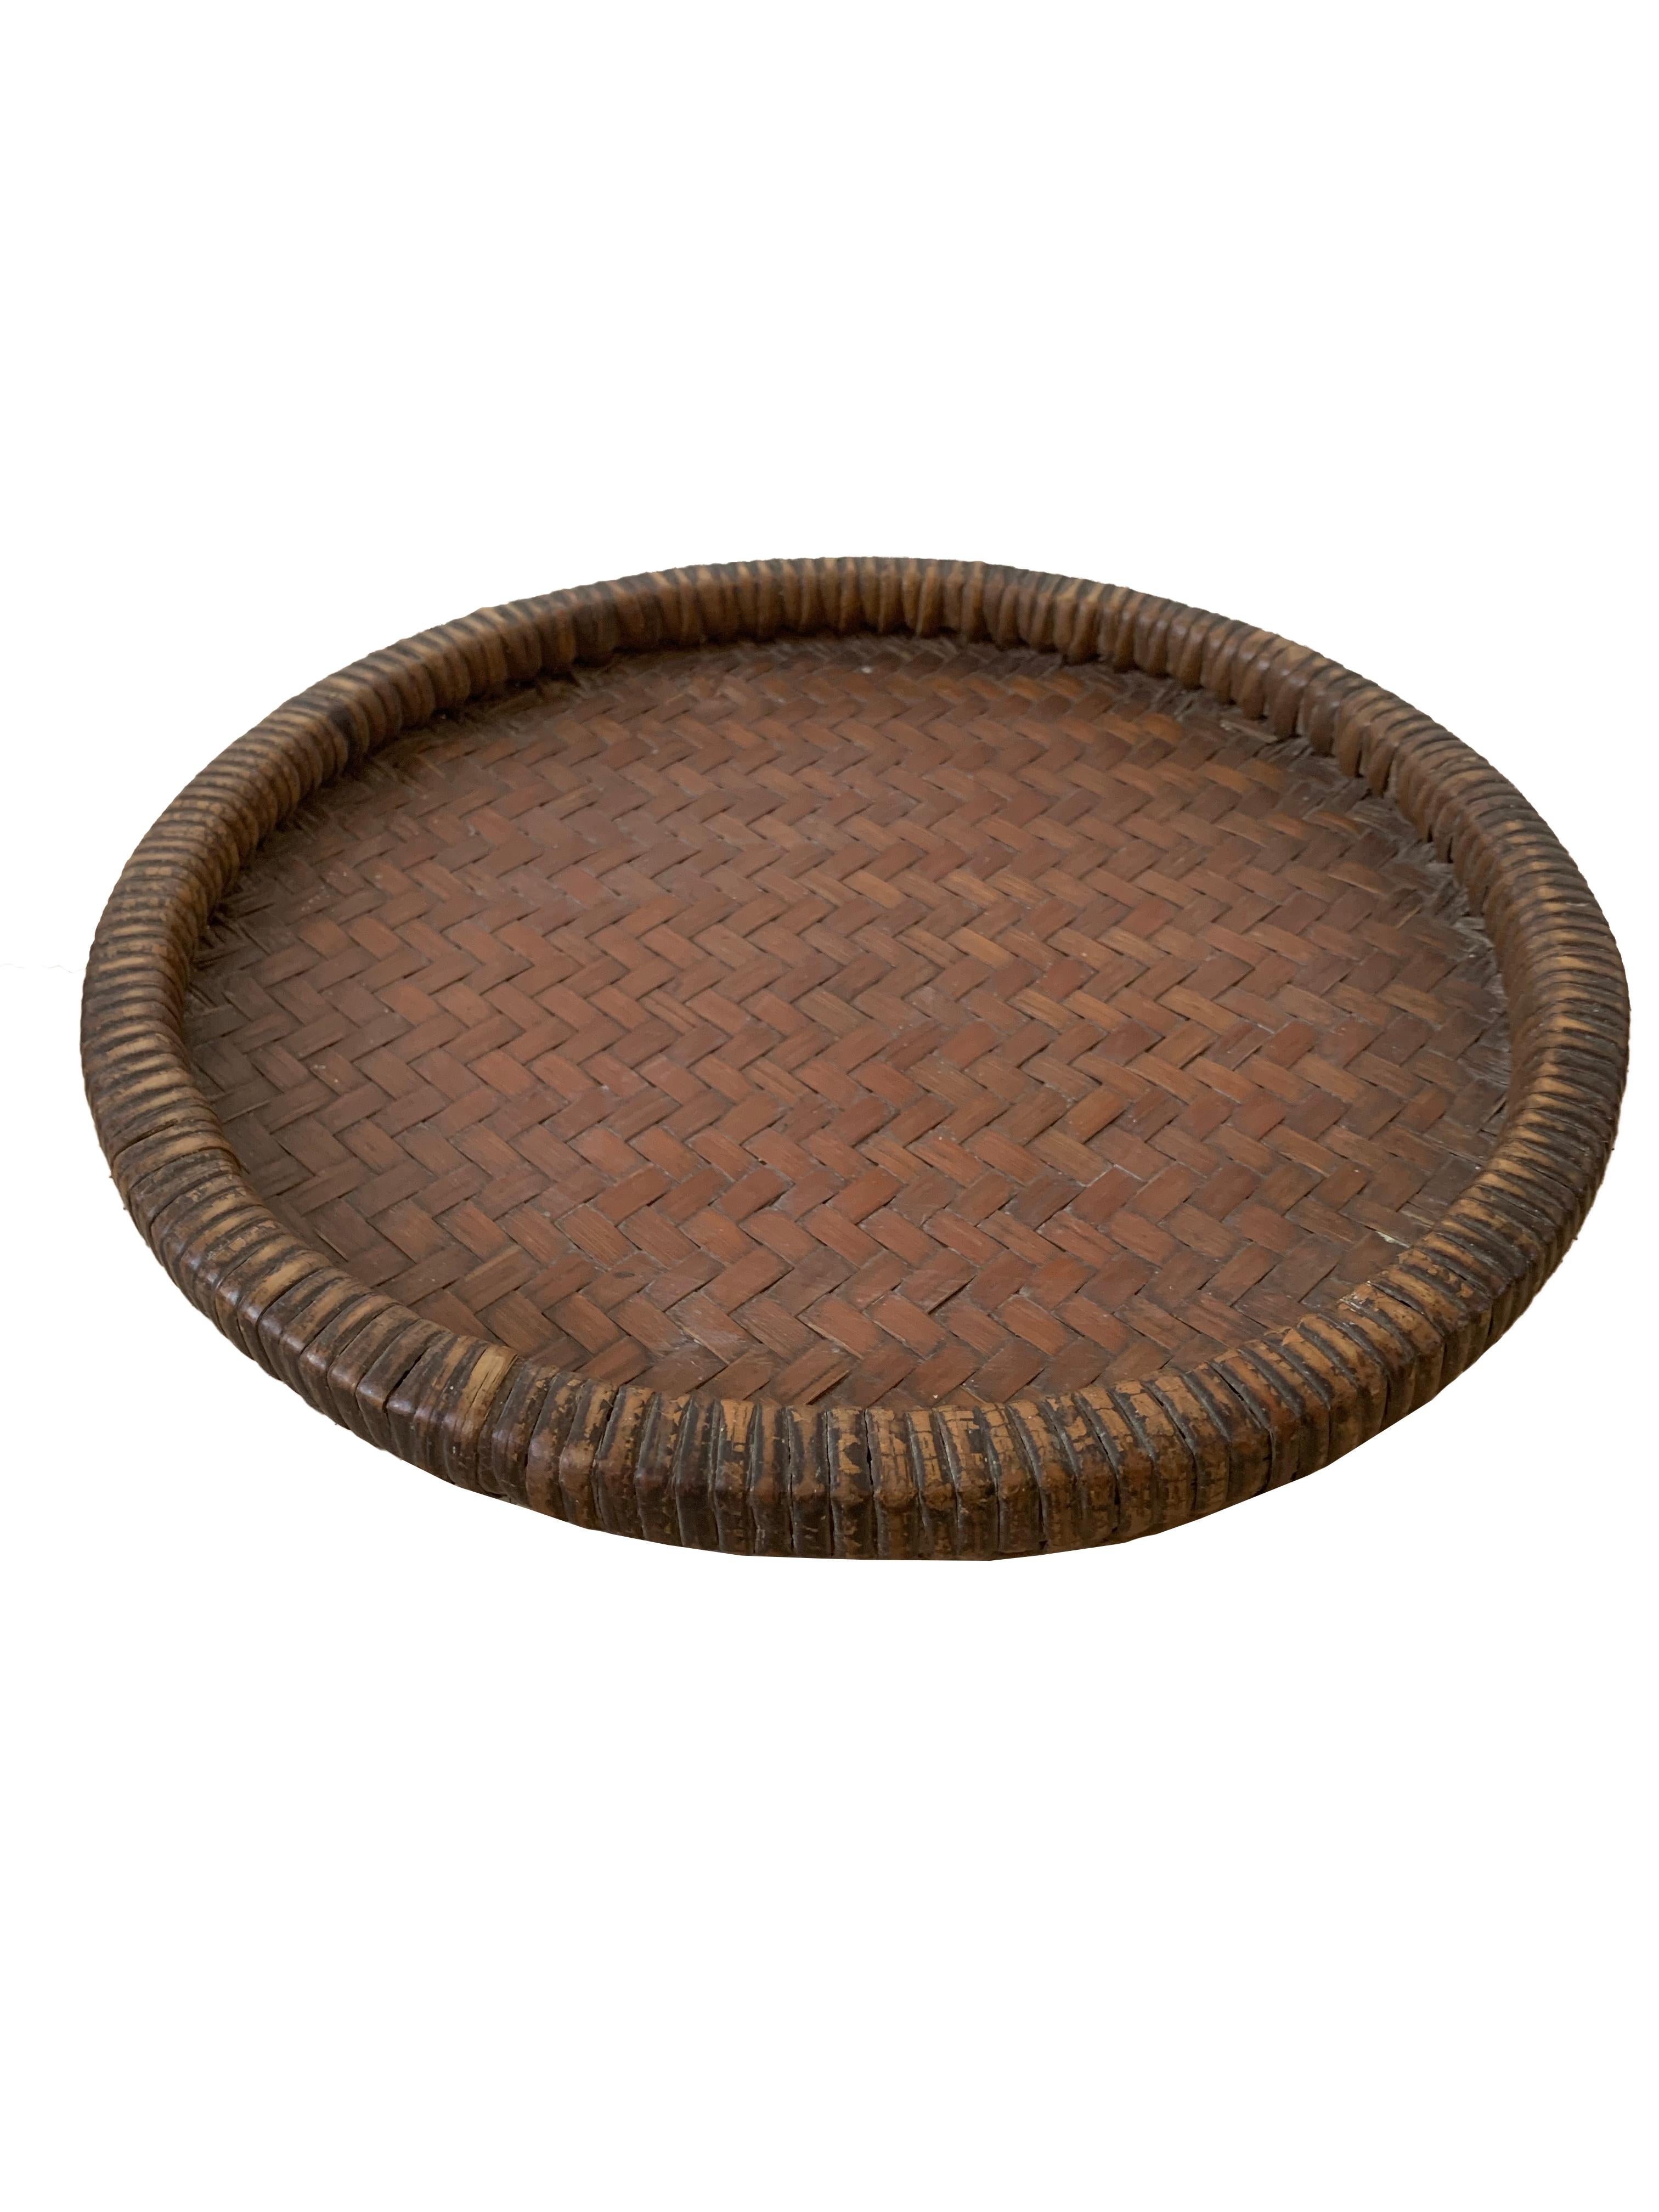 Hand-Crafted Vintage Chinese Woven Rattan Winnowing Basket Set with Painted Characters